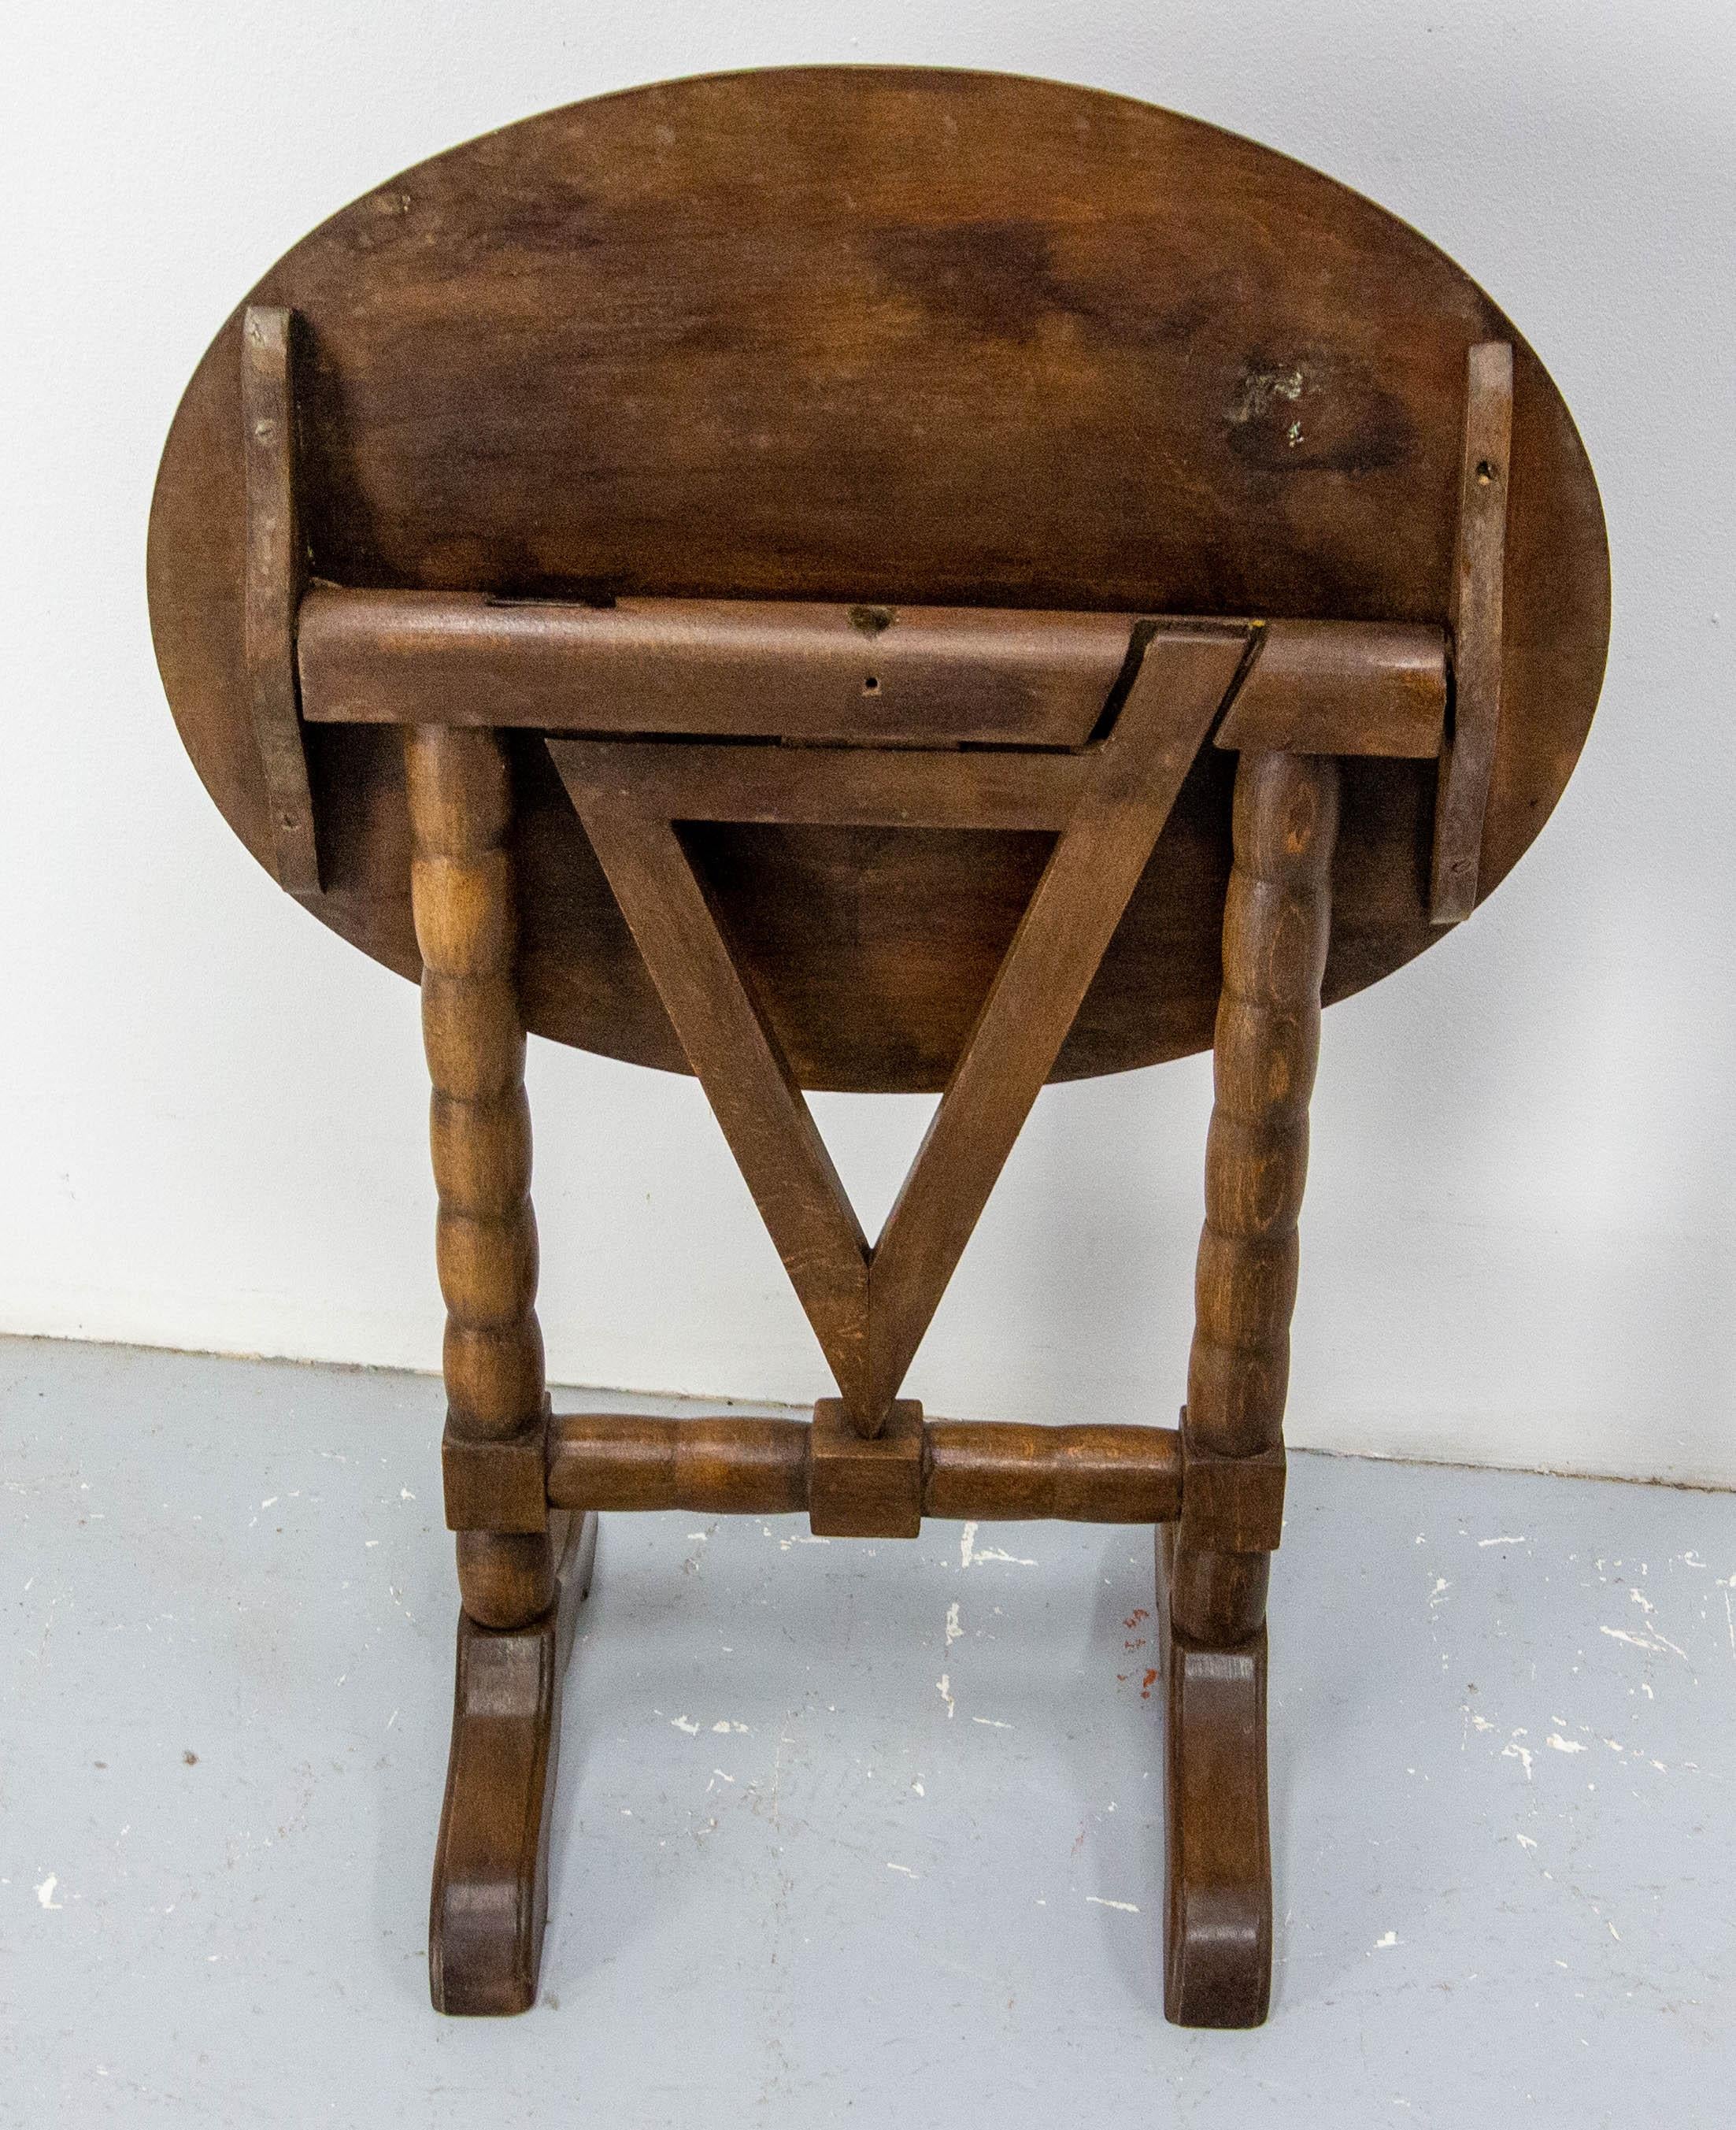 Poplar French Little Gueridon Foldable Side Table Called Winemaker's Table 19th Century